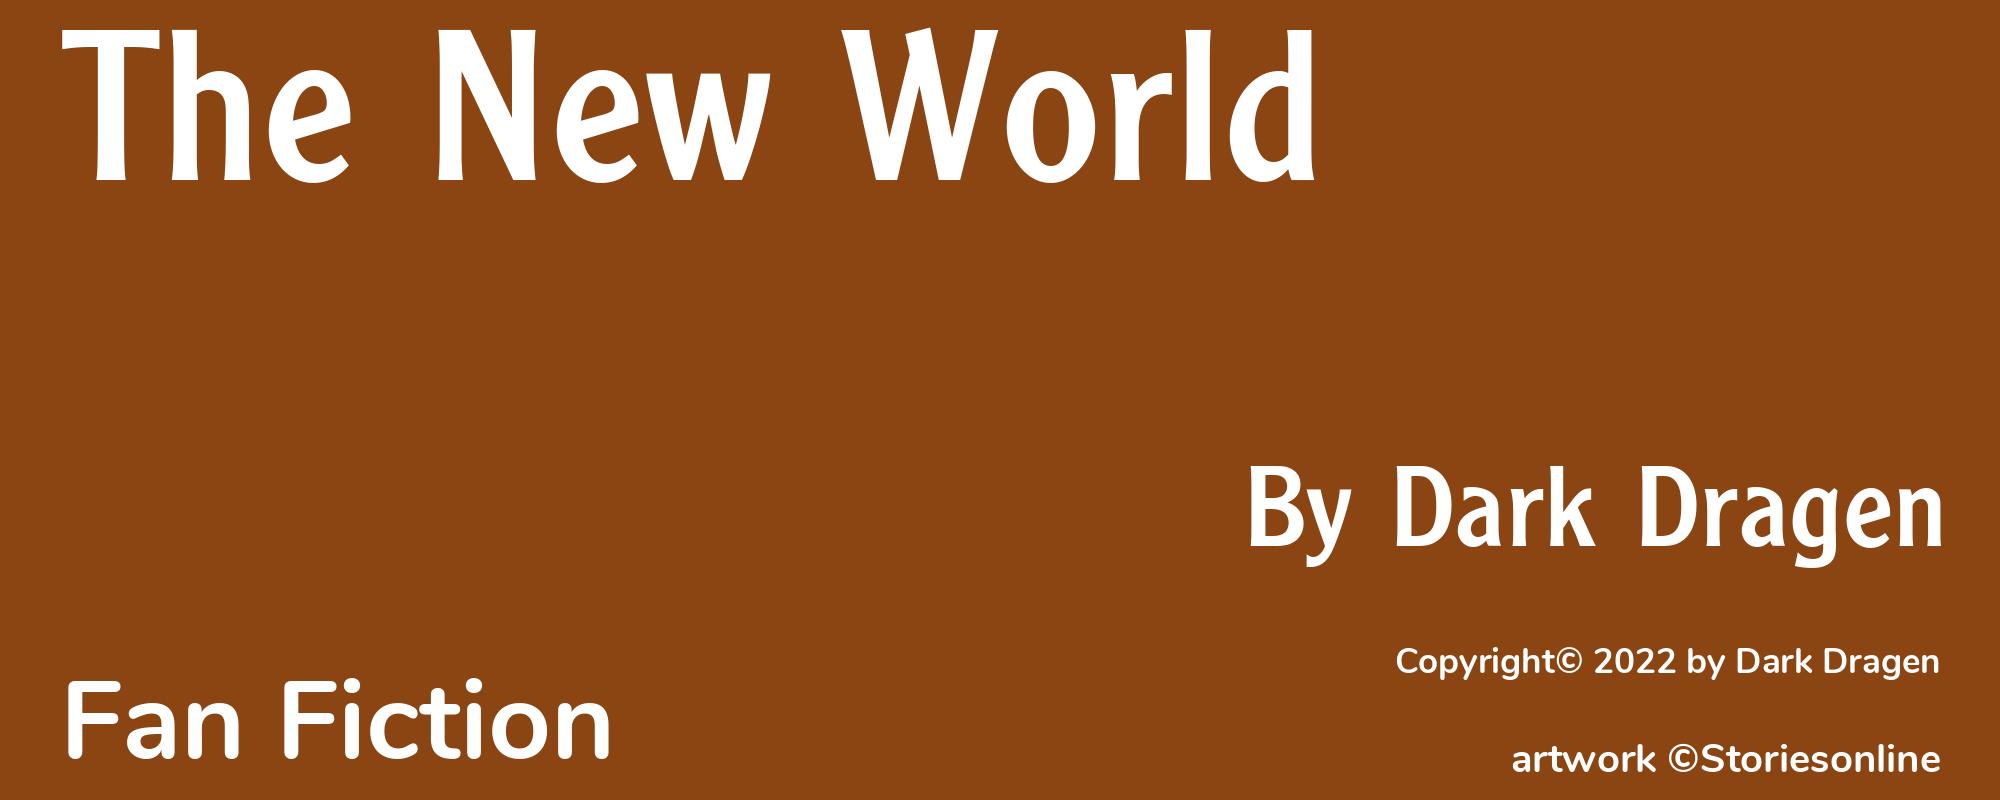 The New World - Cover